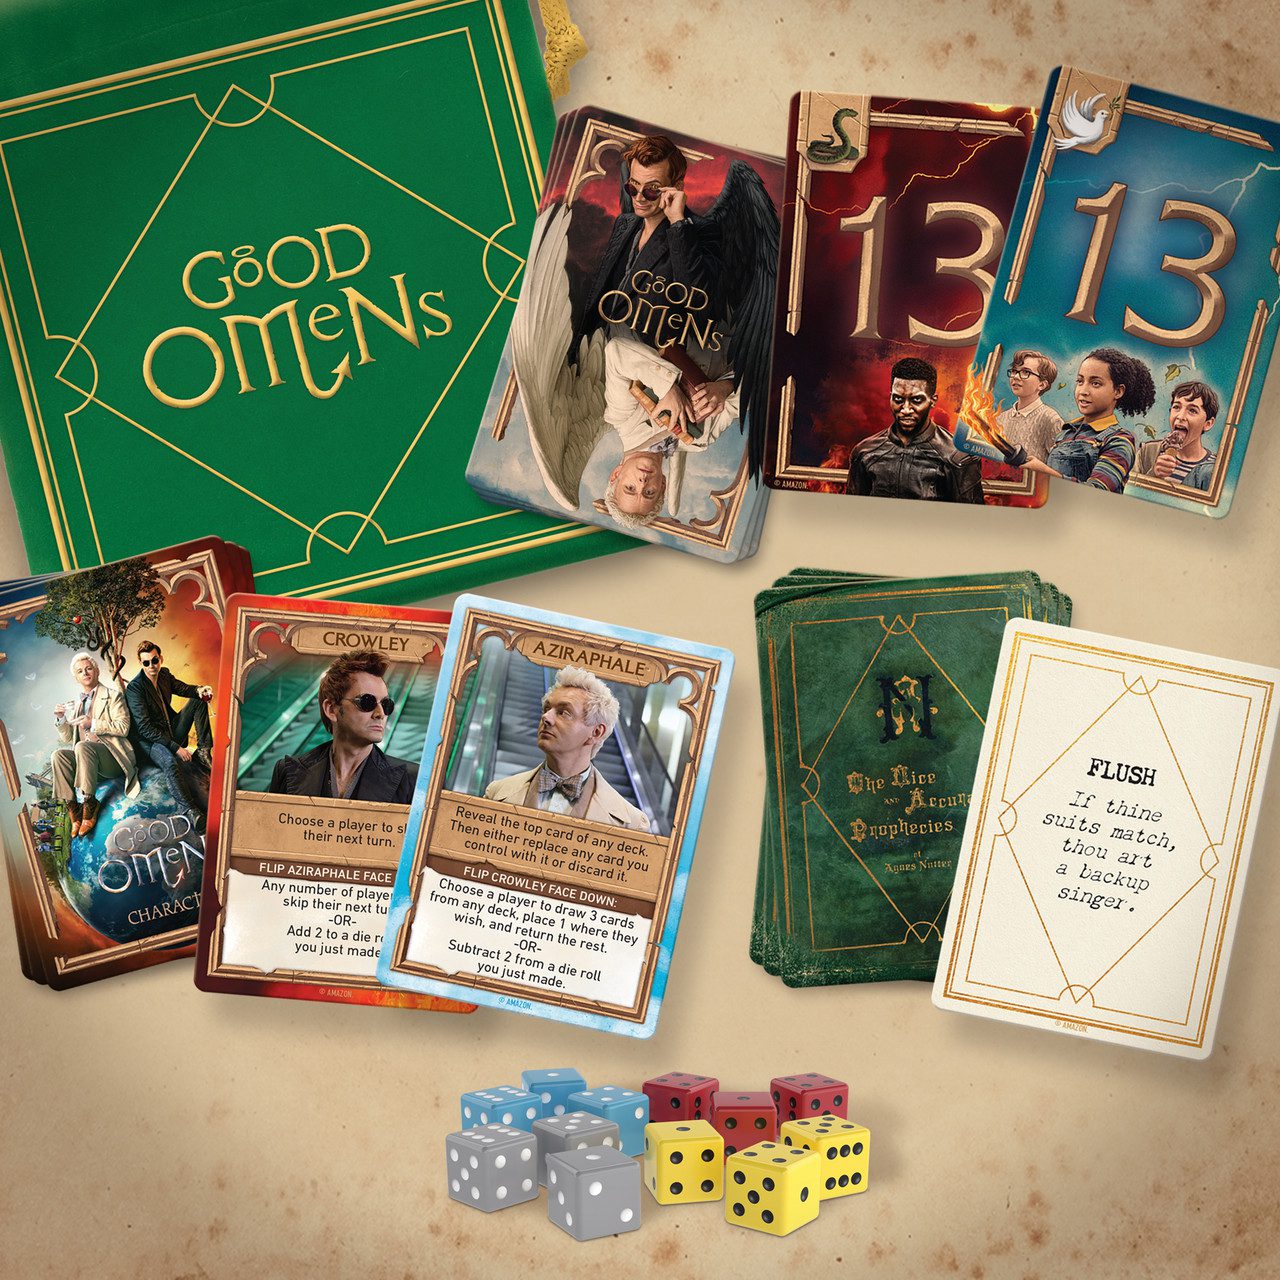 Good Omens: An Ineffable Game cards and components